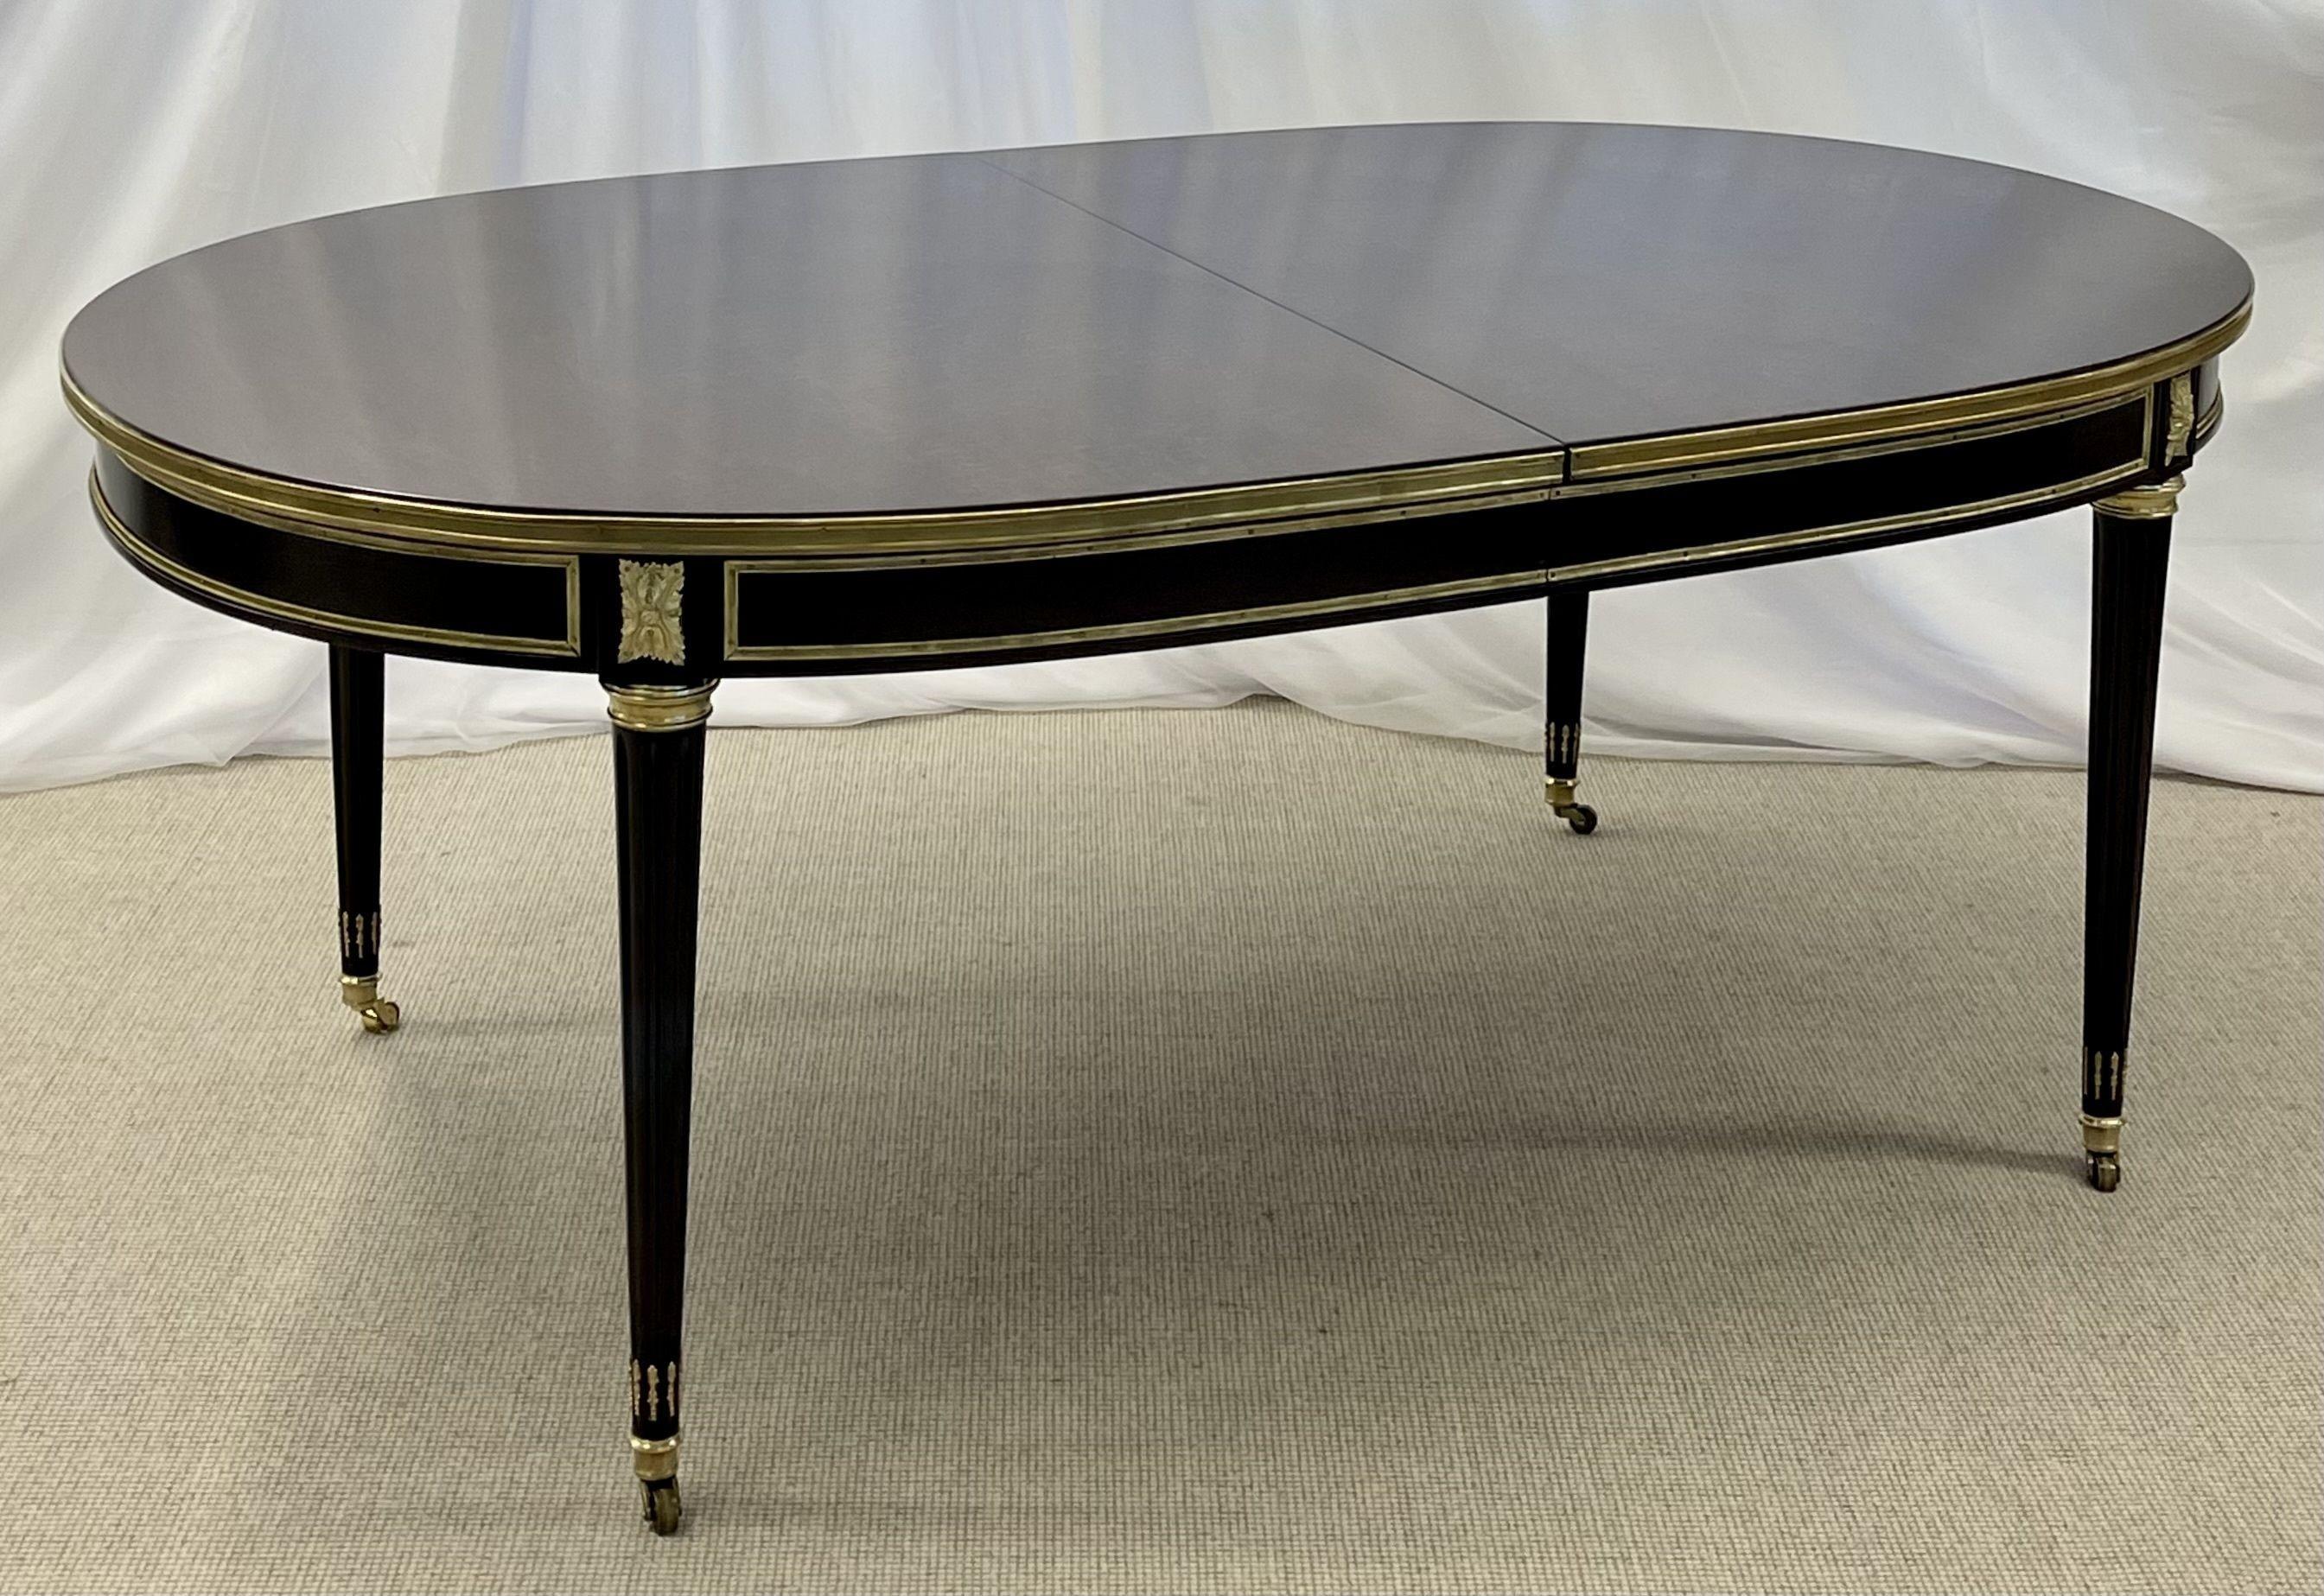 Maison Jansen Tortoise shell finished dining or conference table. This stunning Louis XVI style, bronze mounted, table is simply spectacular. The bronze sabots and casters support a reeded tapering group of table legs supporting a bronze framed